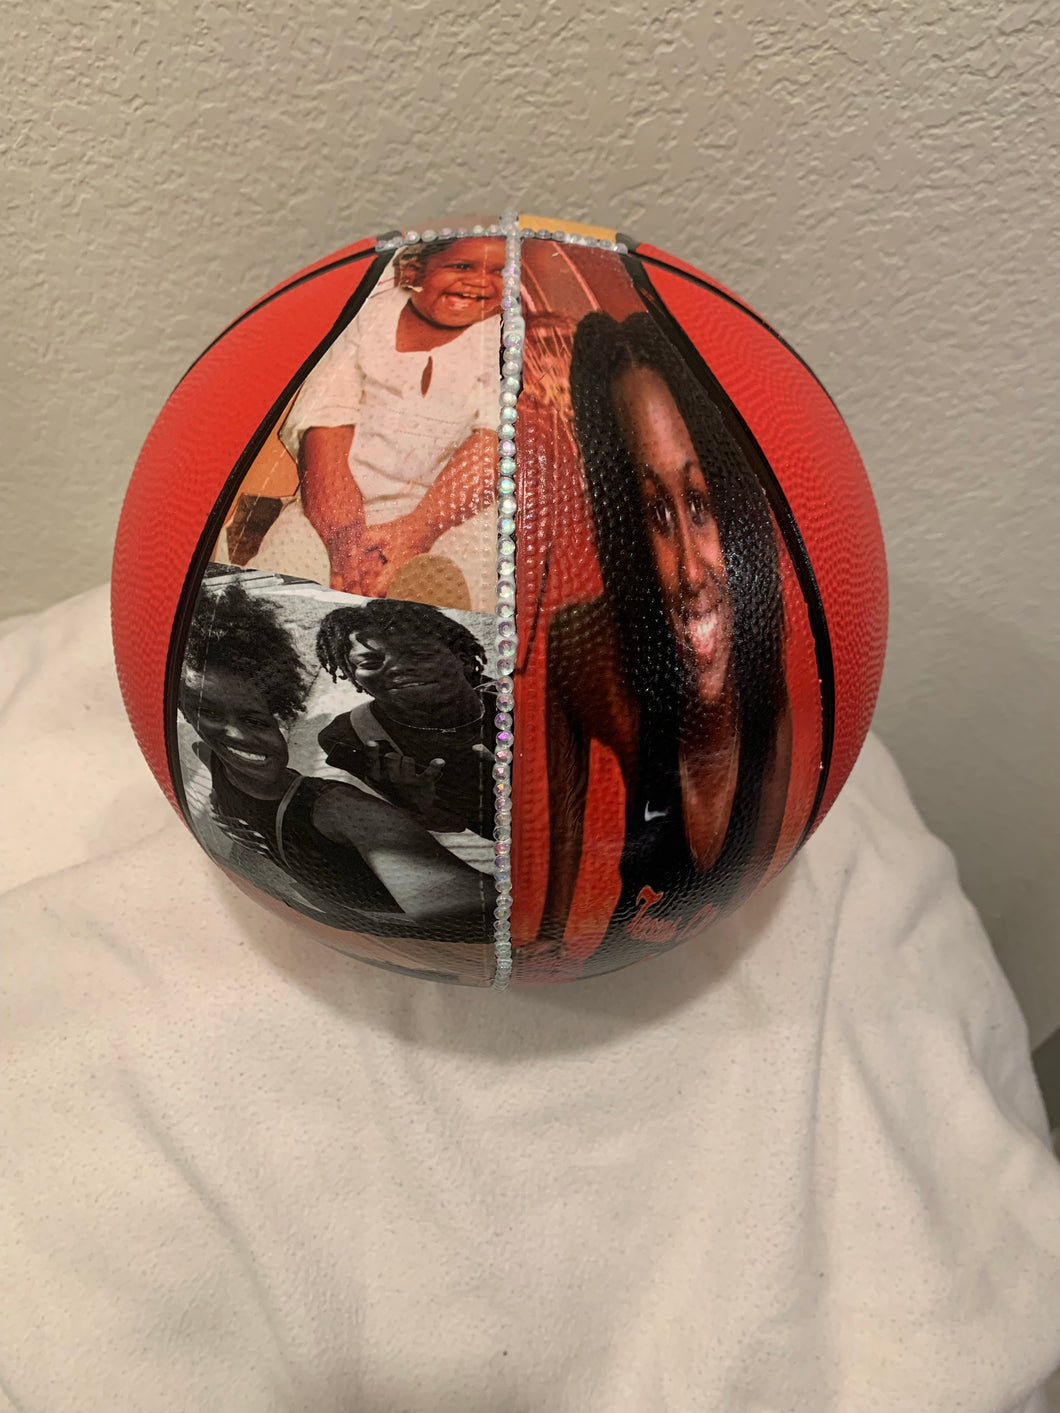 Decorated Basketball